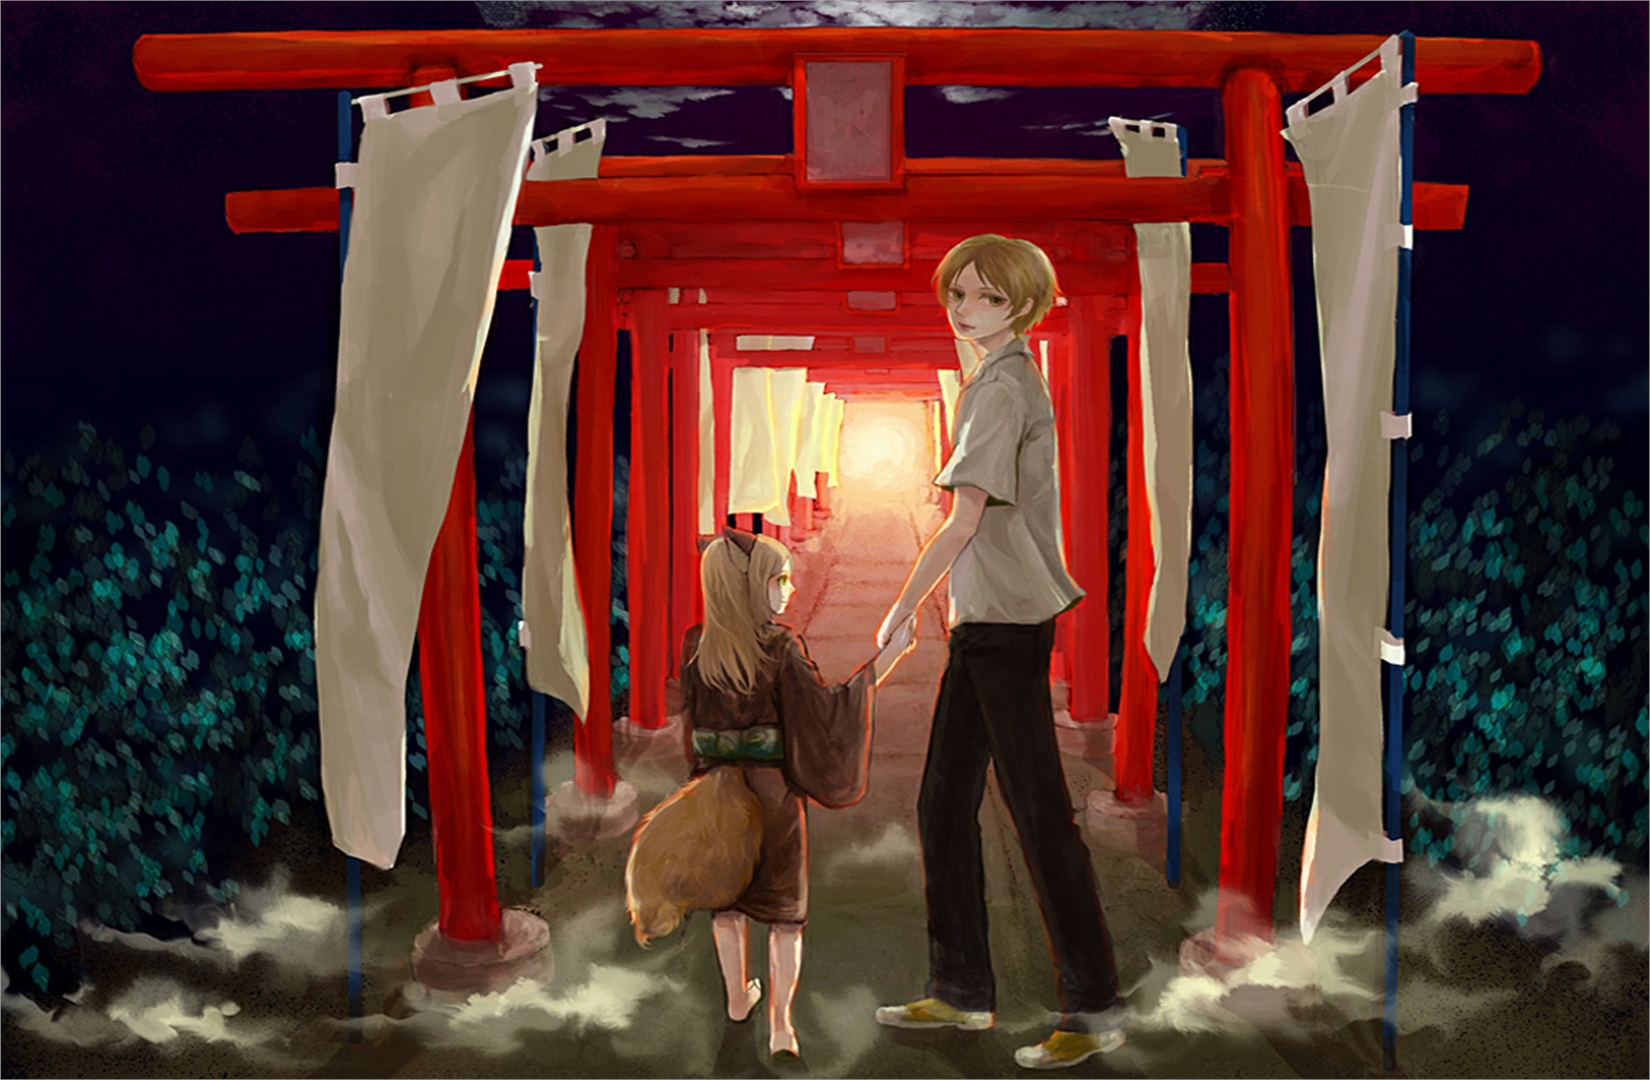 Takashi Natsume and Kogitsune, characters from Natsume's Book of Friends, in an anime-style artwork.